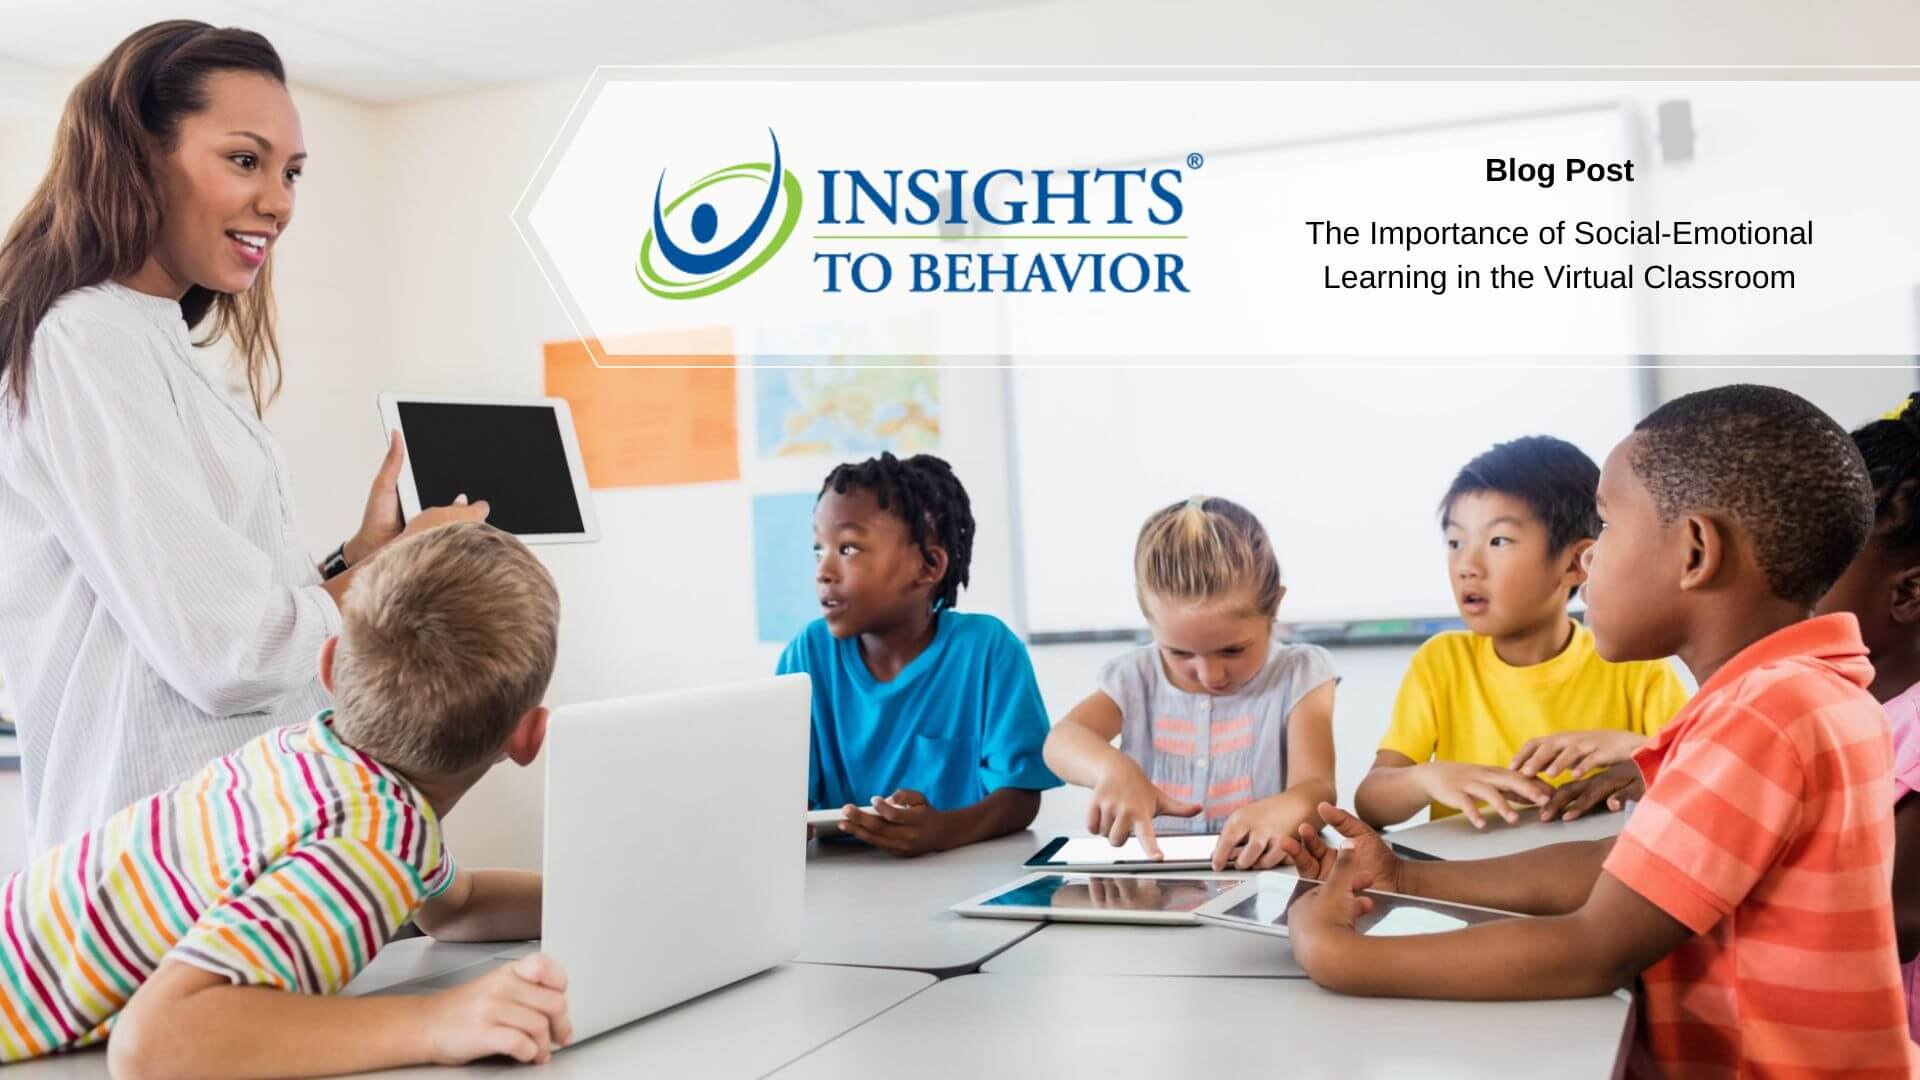 The Importance of Social-Emotional Learning in the Virtual Classroom -  Insights to Behavior